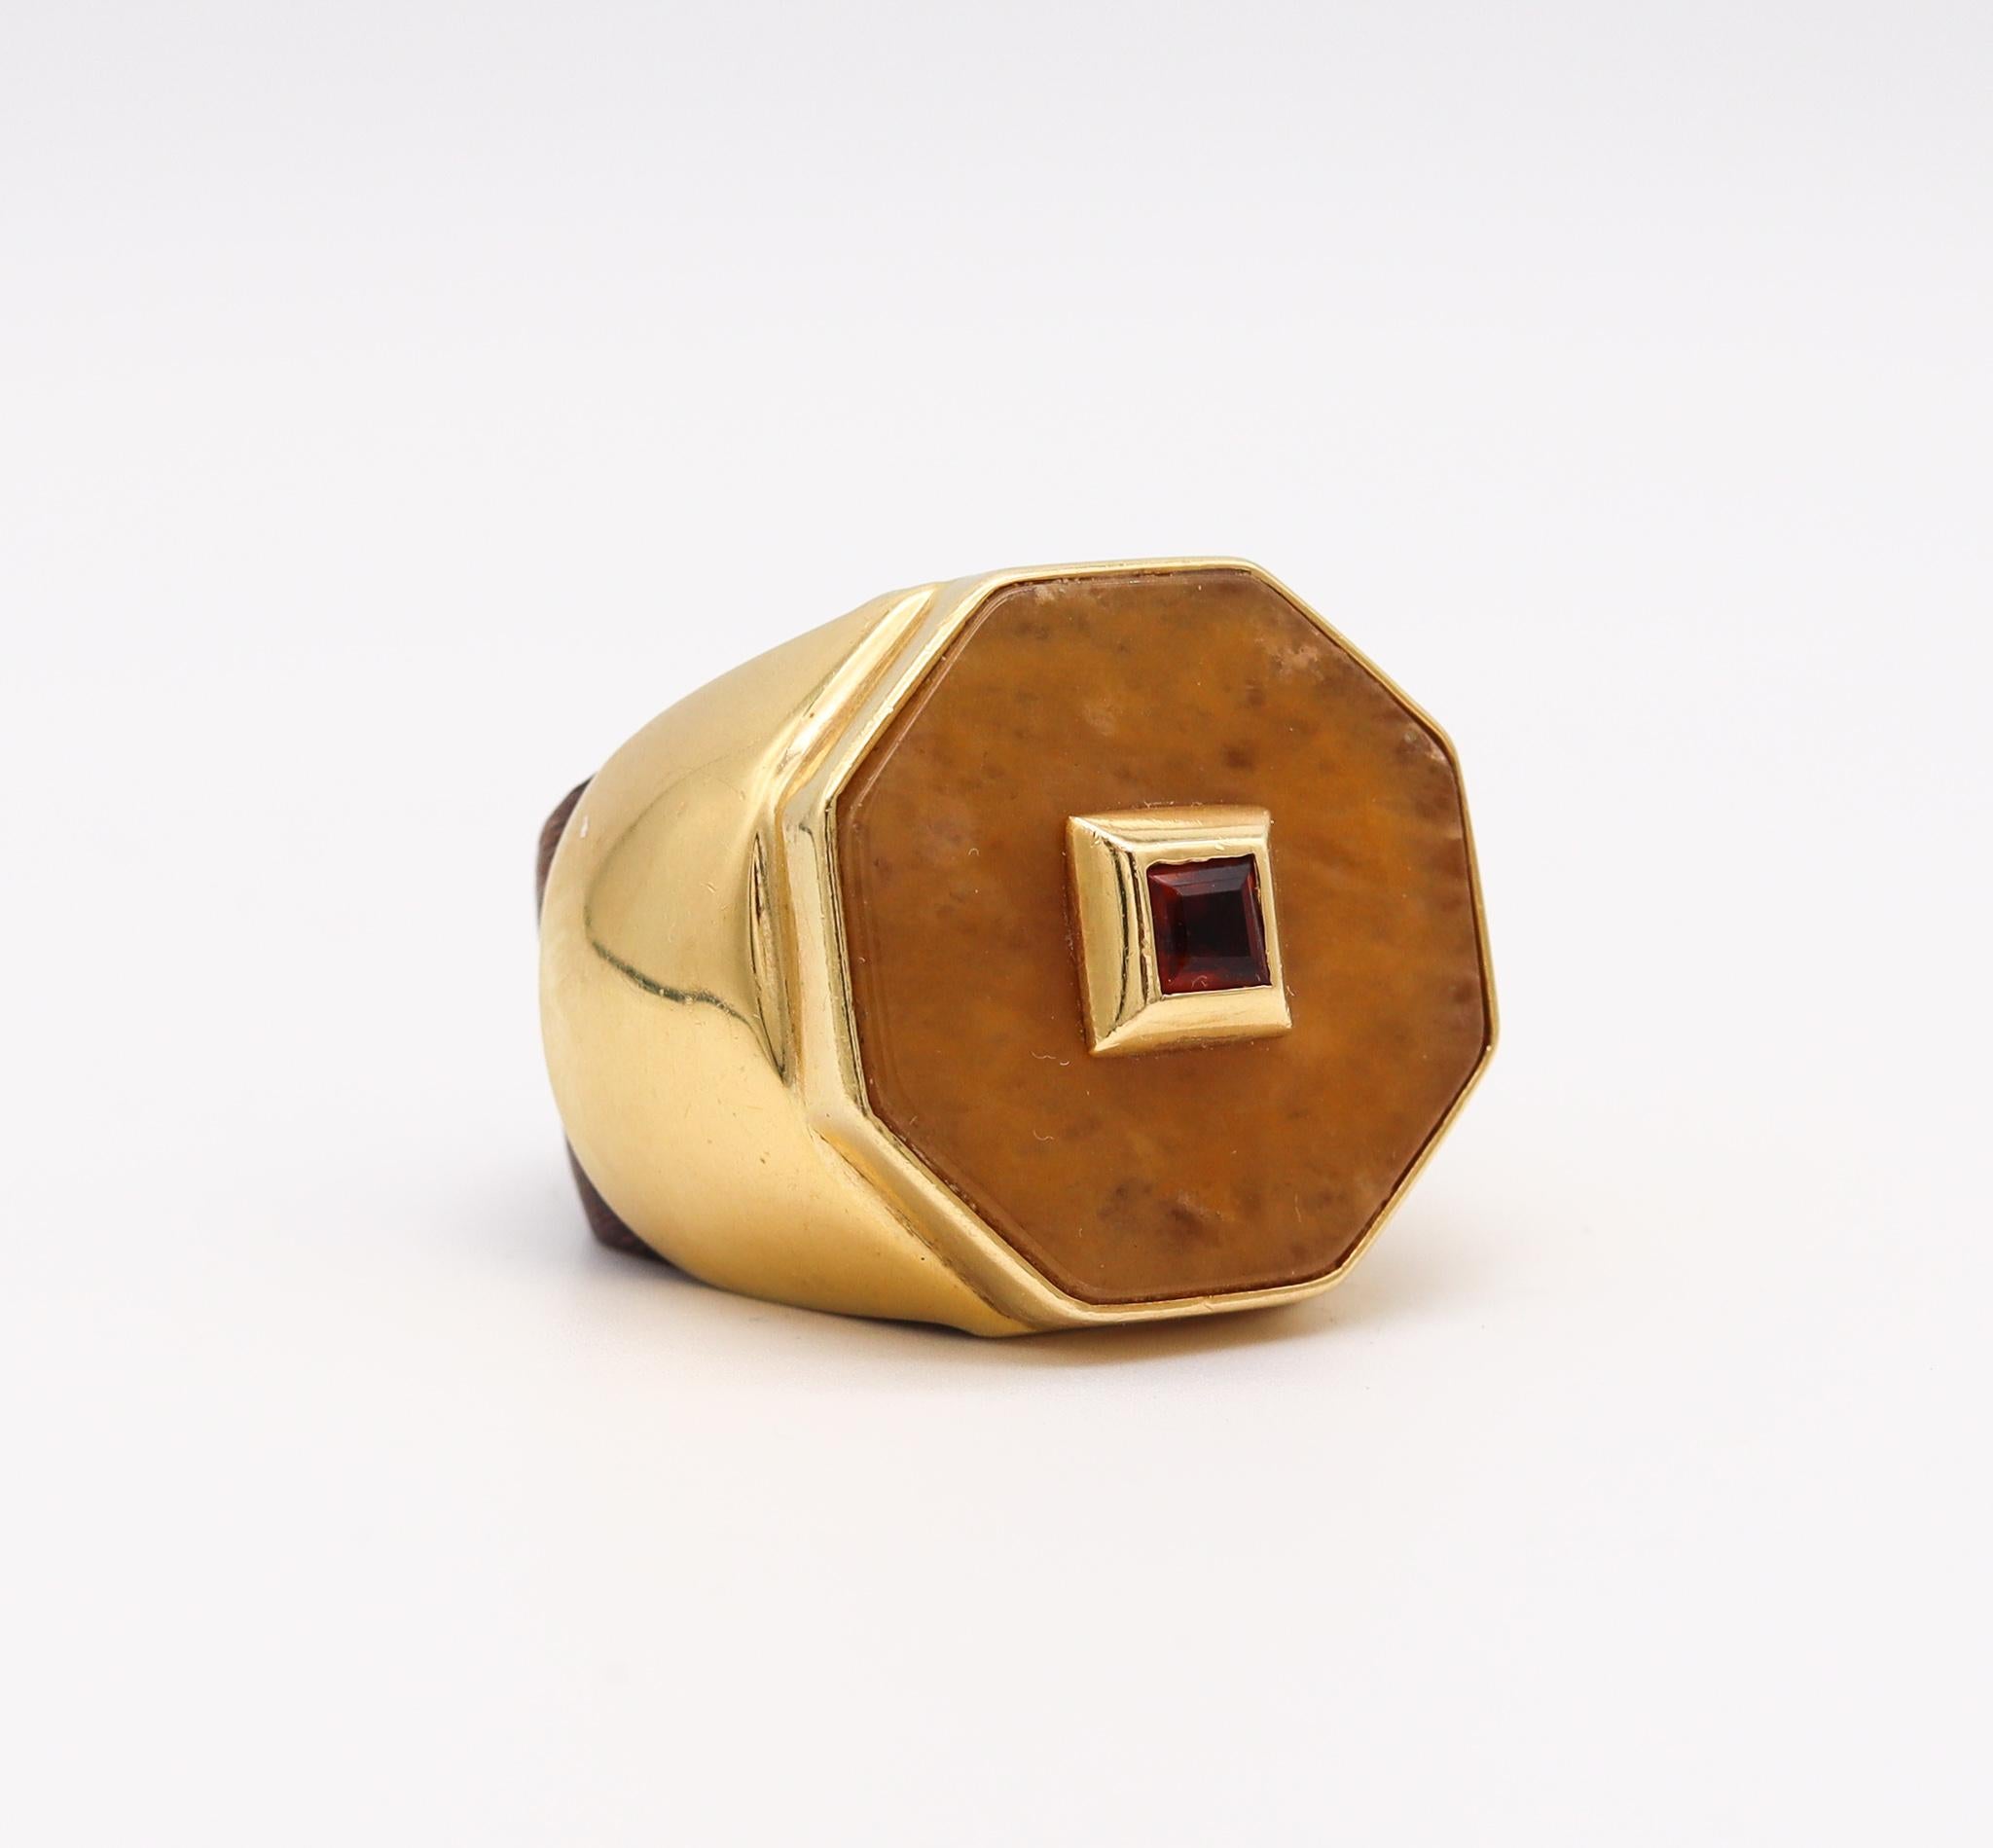 Modernist geometric cocktail ring.

Beautiful bold cocktail ring, created in Italy back in the very early 1970's. This geometric ring has been crafted from a single piece, carved from rose wood and yellow gold of 18 karats gold with high polished